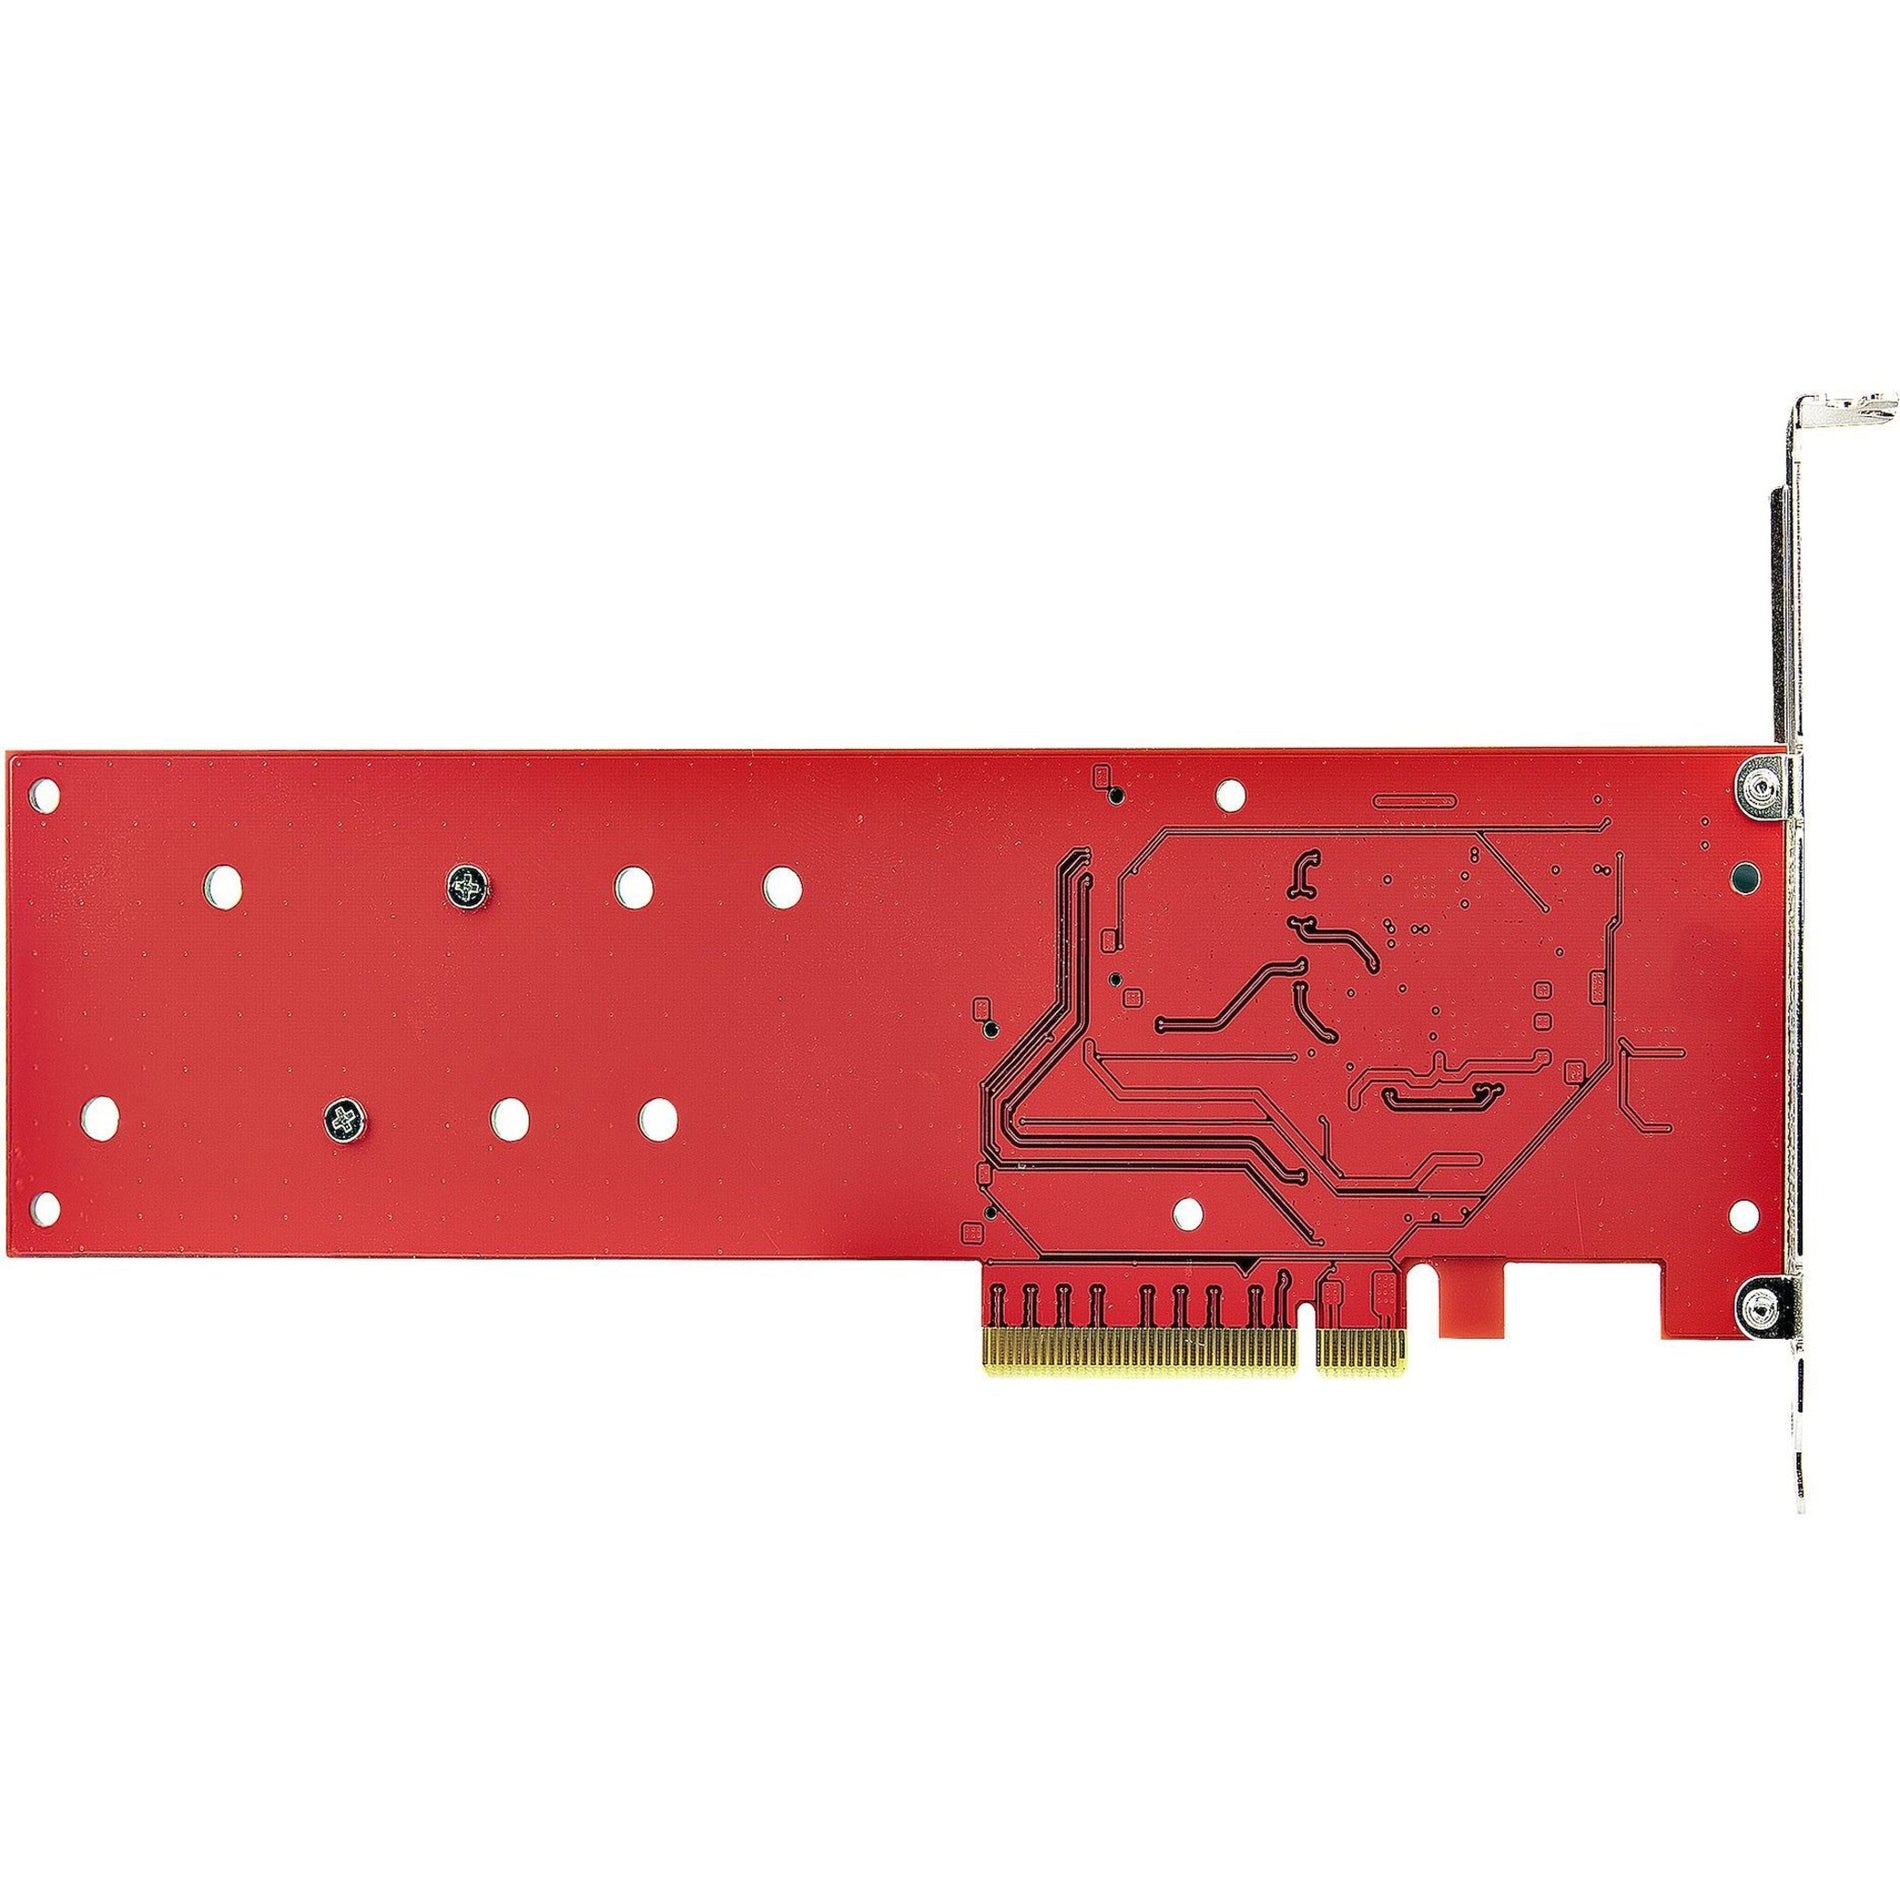 StarTech.com DUAL-M2-PCIE-CARD-B PCIe to M.2 Adapter Card, Dual NVMe or AHCI M.2 SSD to PCI Express 4.0, Up to 7.8GBps/Drive, Bifurcation Required